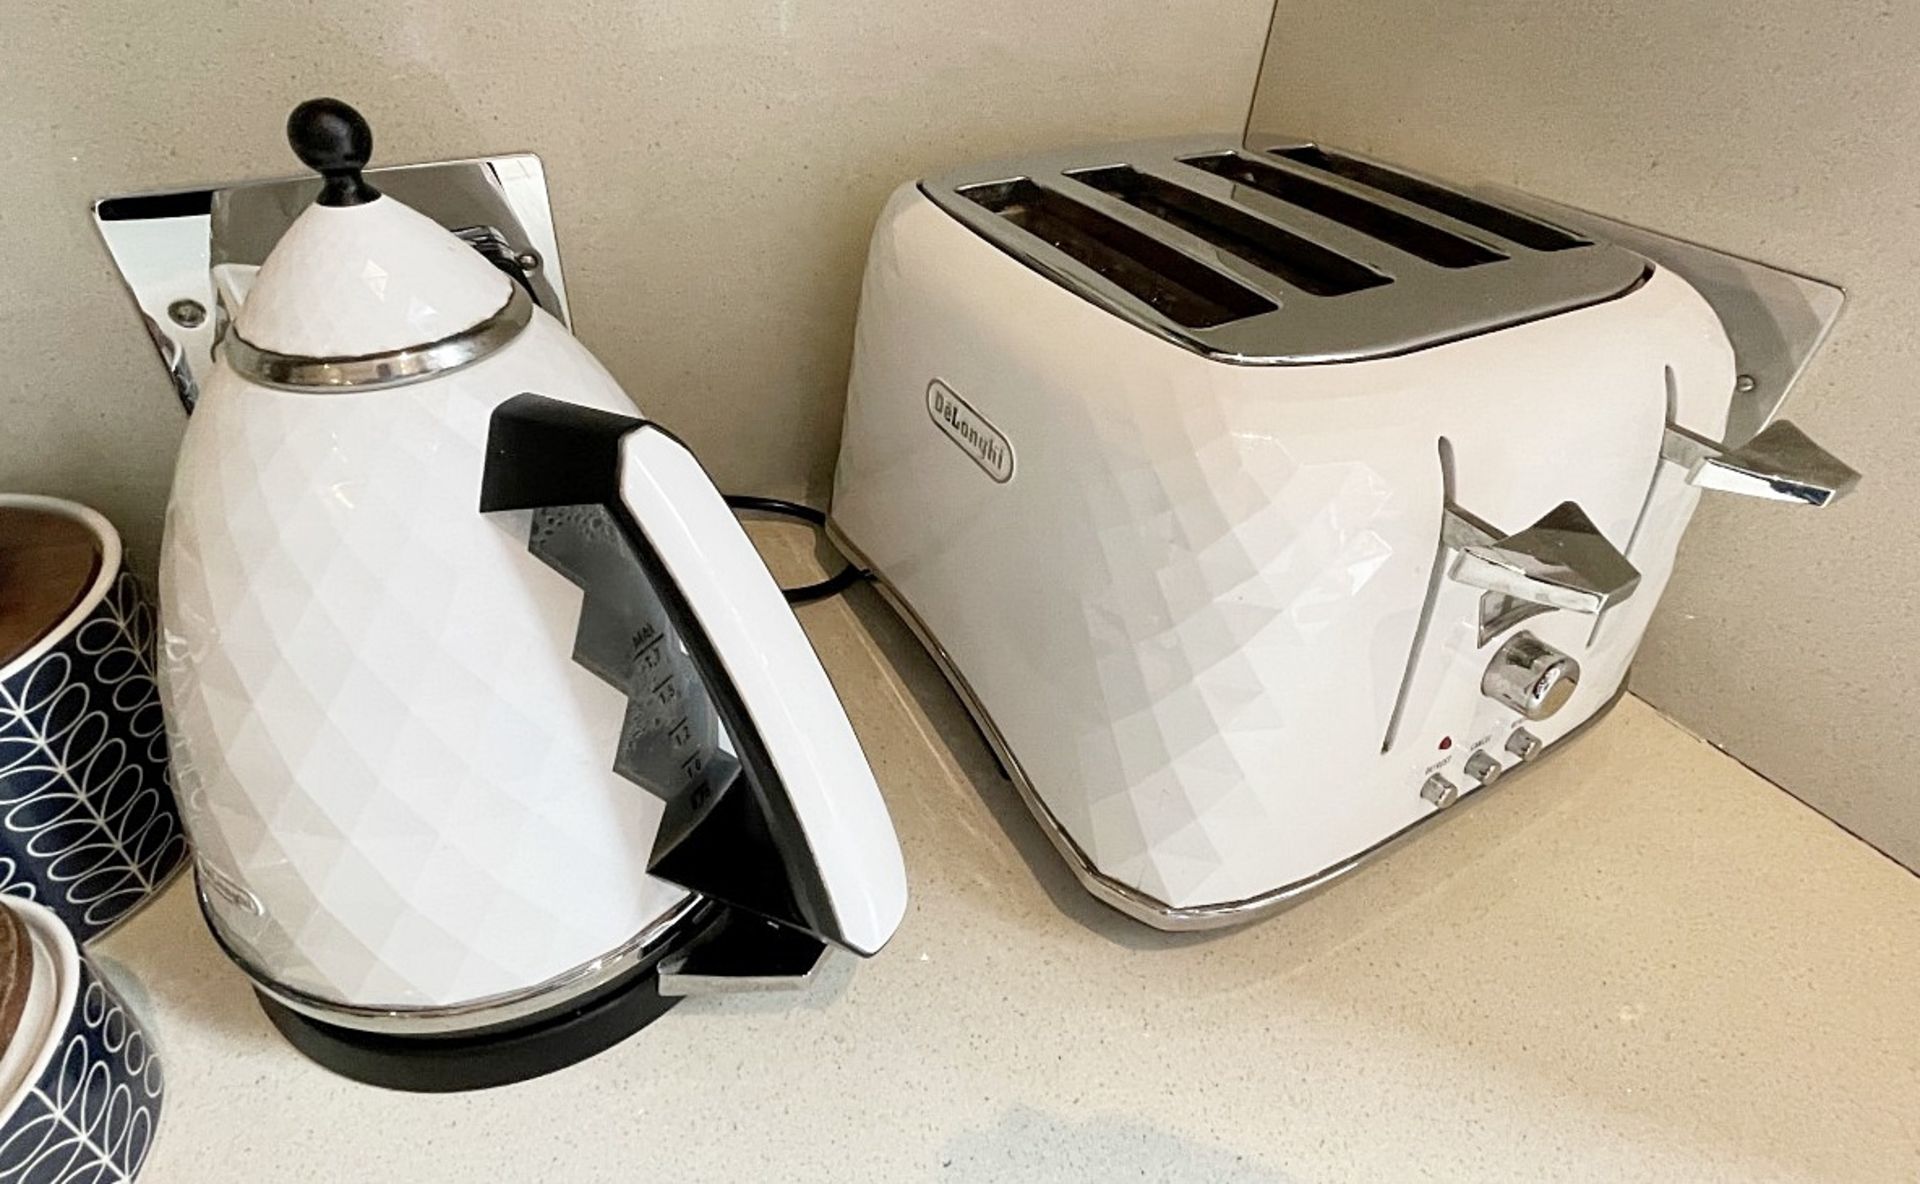 1 x DELONGHI Electric Kettle And 4-Slice Toaster Set In White And Chrome - Ref: SGV133/KIT - CL672 -